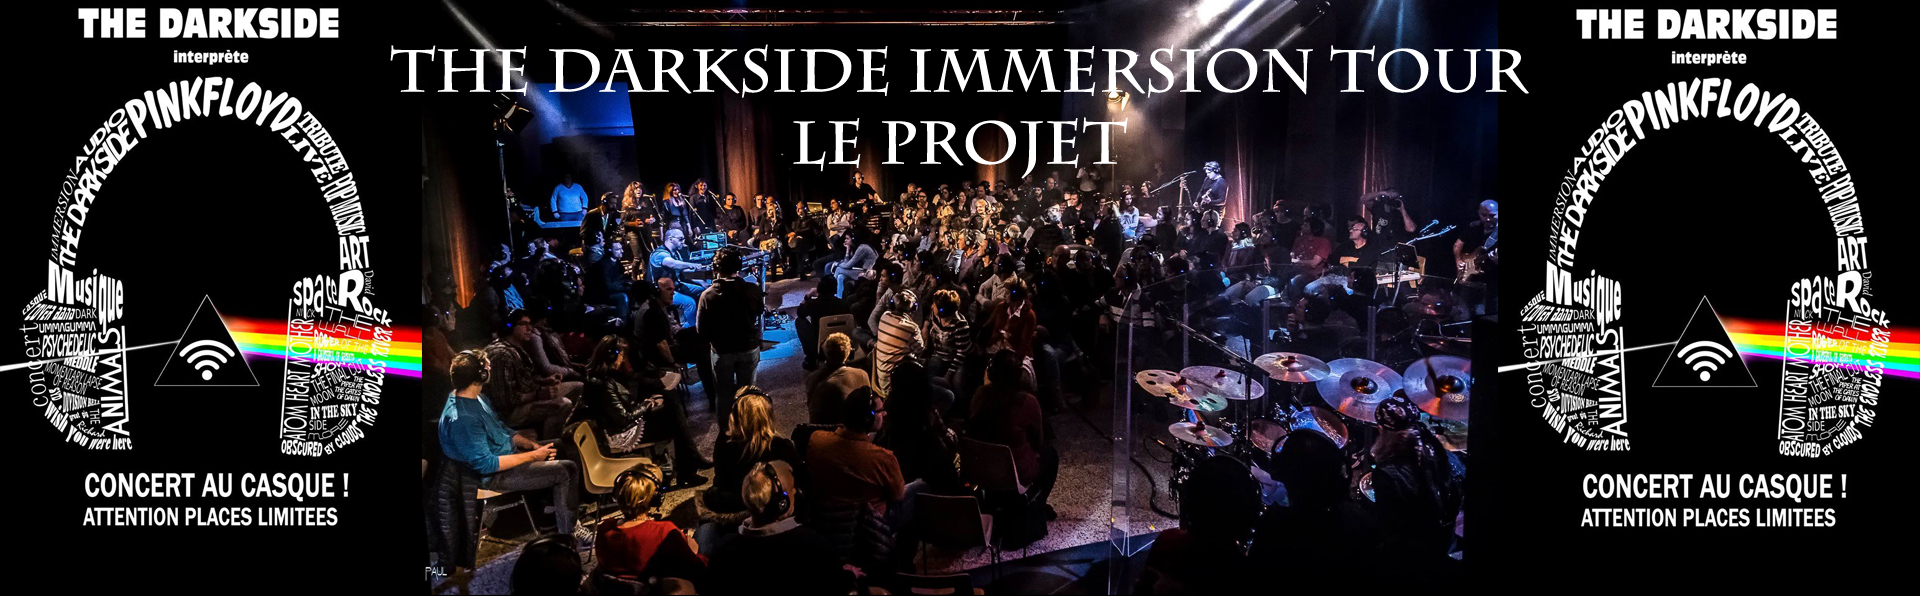 Projet The Darkside Immersion Tour